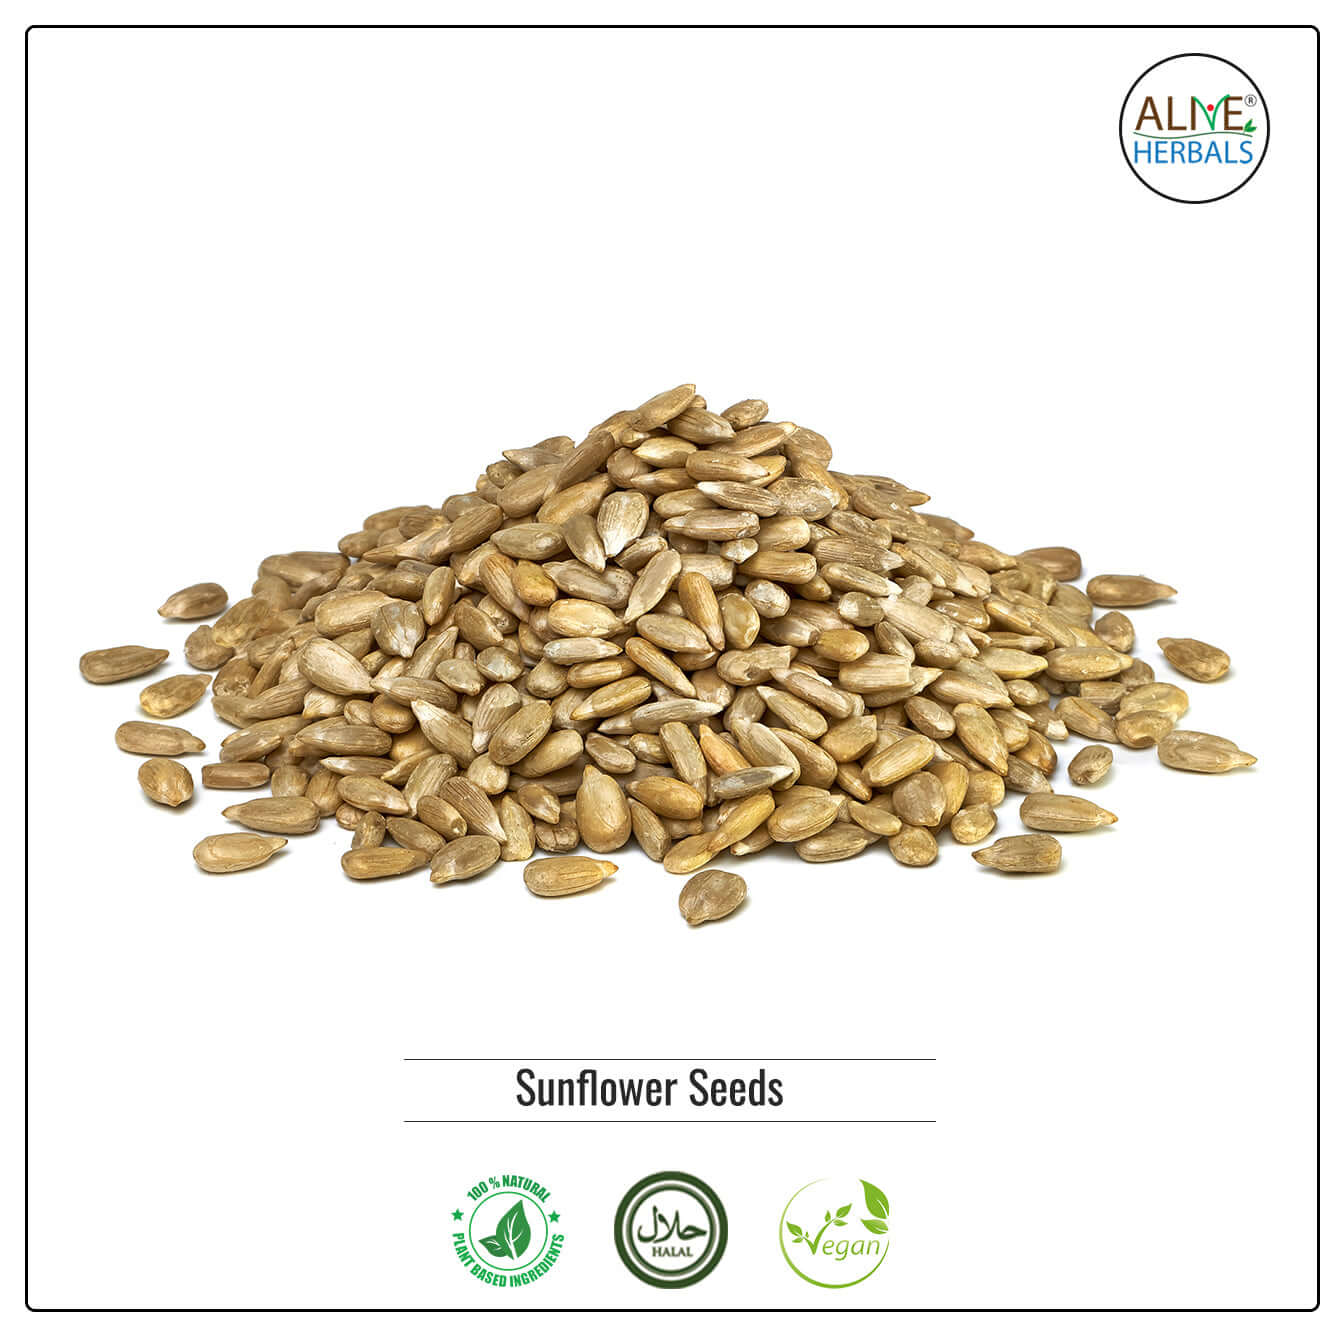 Sunflower Seed Raw -  Buy at Natural Food Store | Alive Herbals.